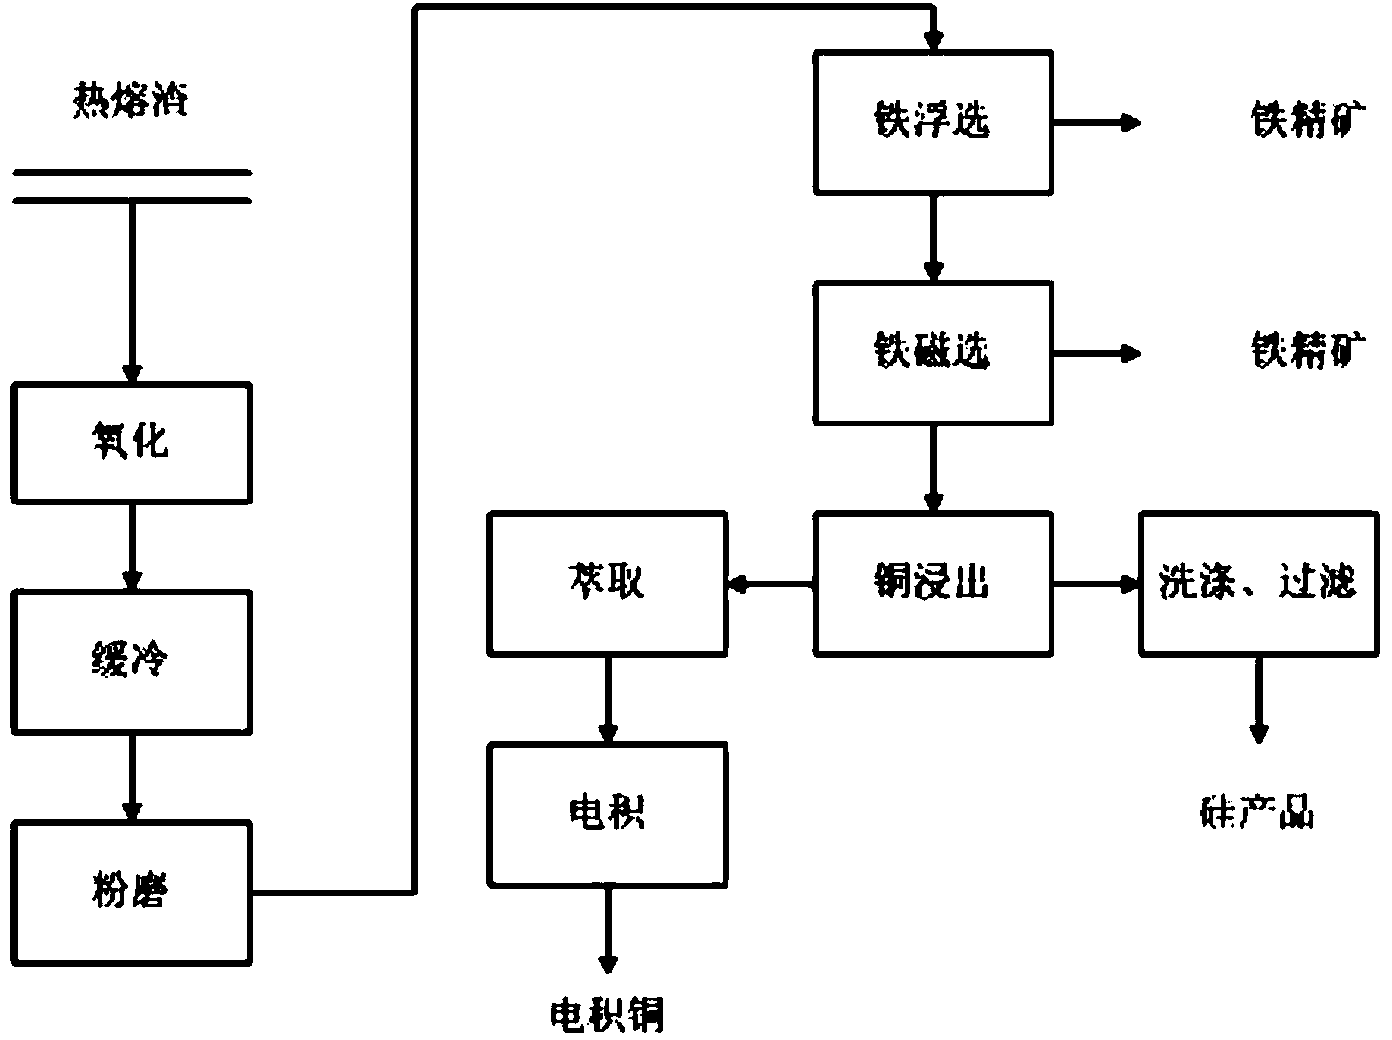 Method for recovering copper, iron and silicon from copper smelting slag